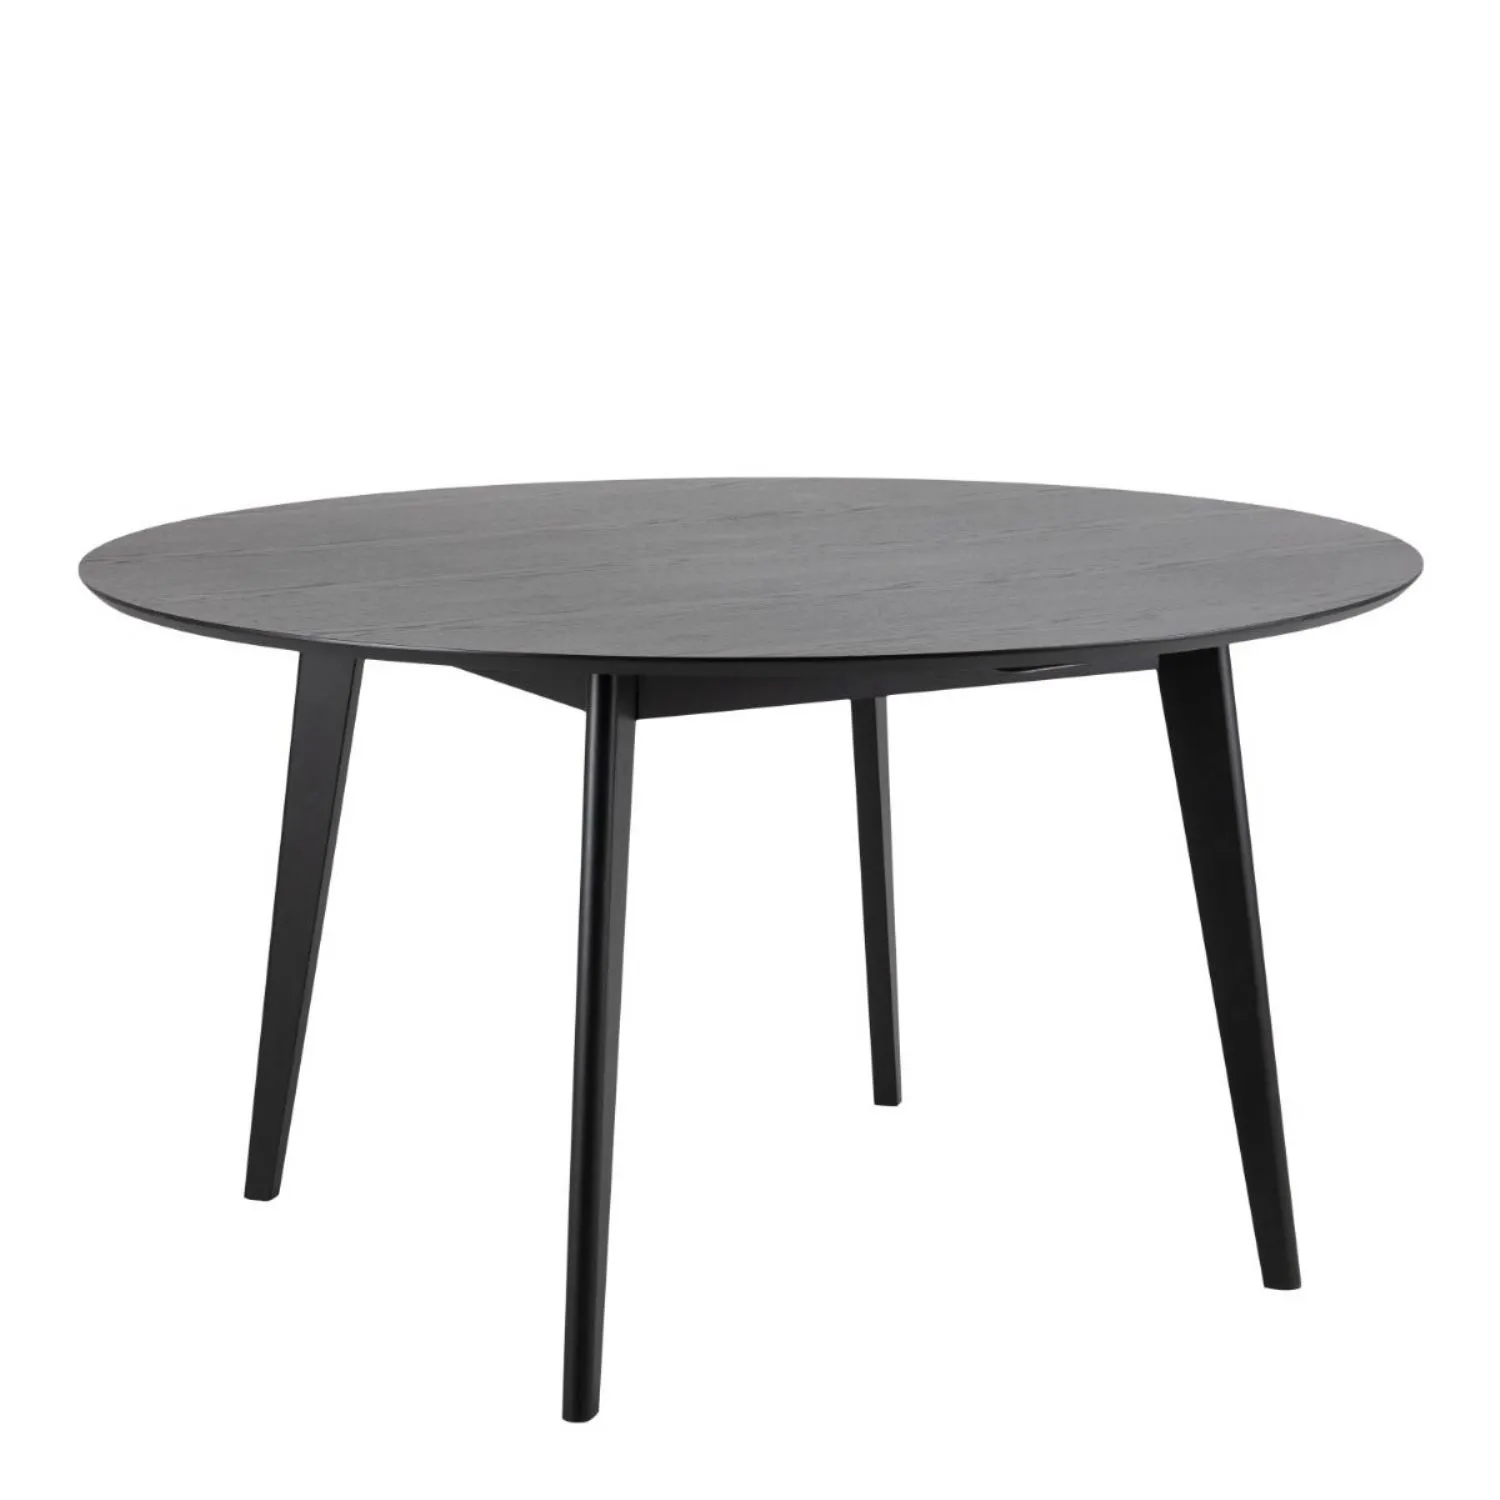 Roxby Round Dining Table in Black 140x76cm